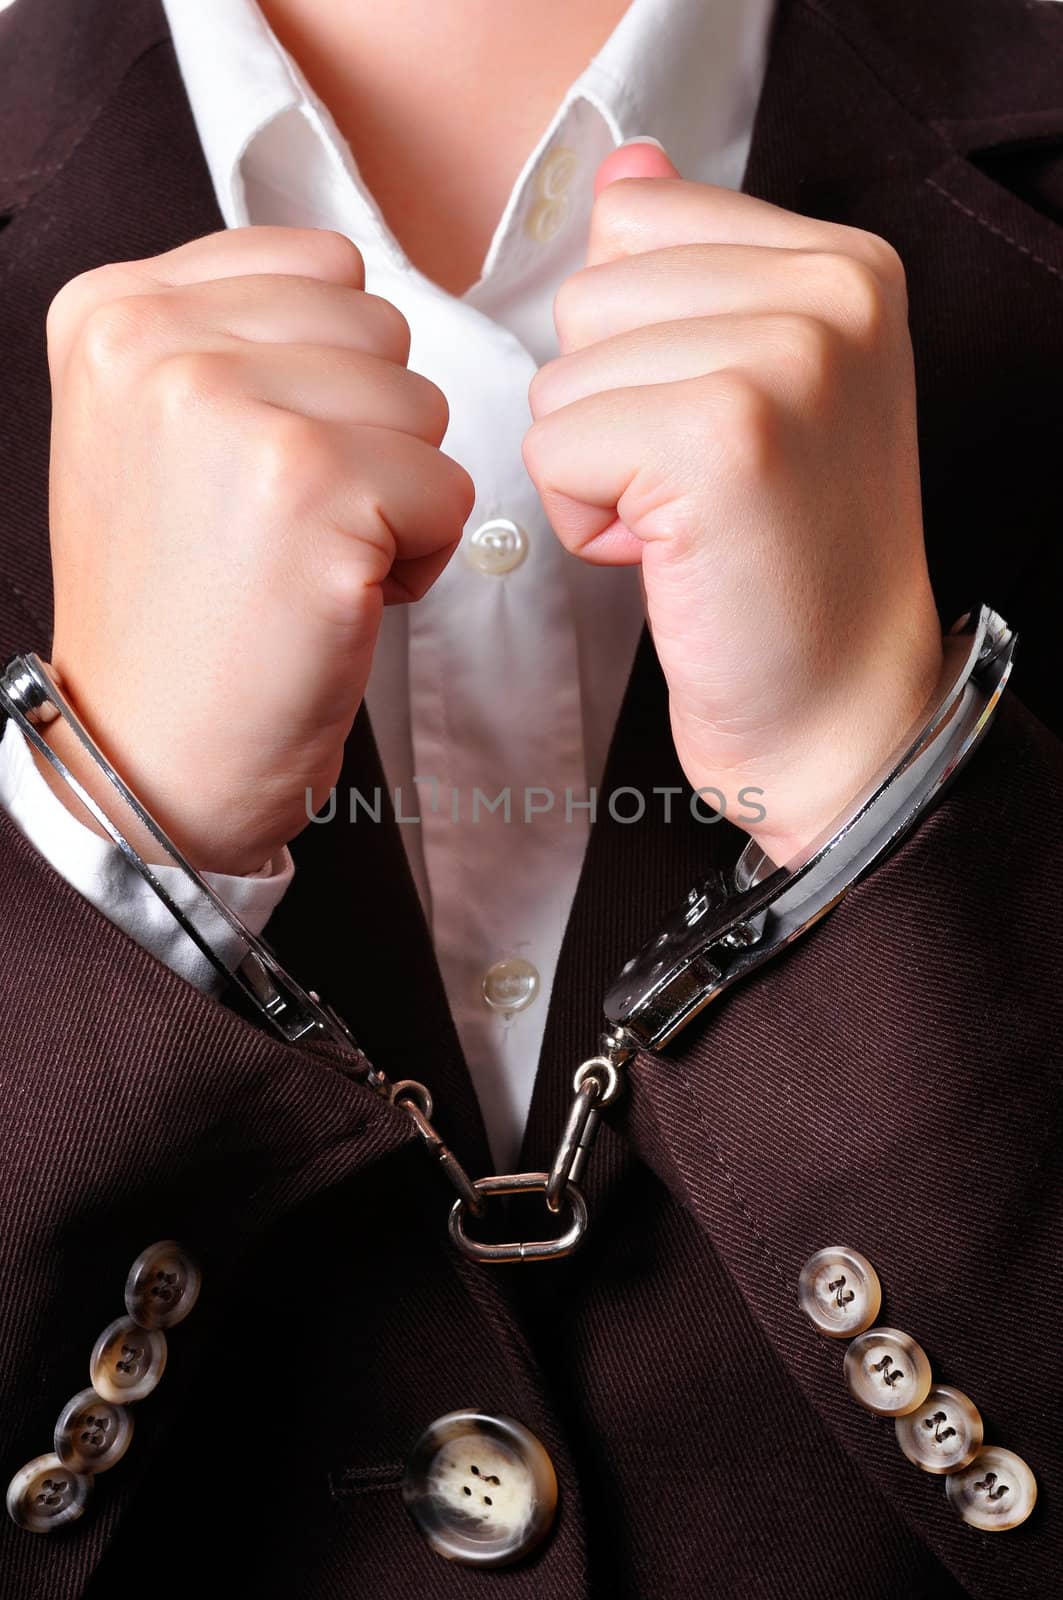 Closeup of an handcuffed businessperson in a brown suit